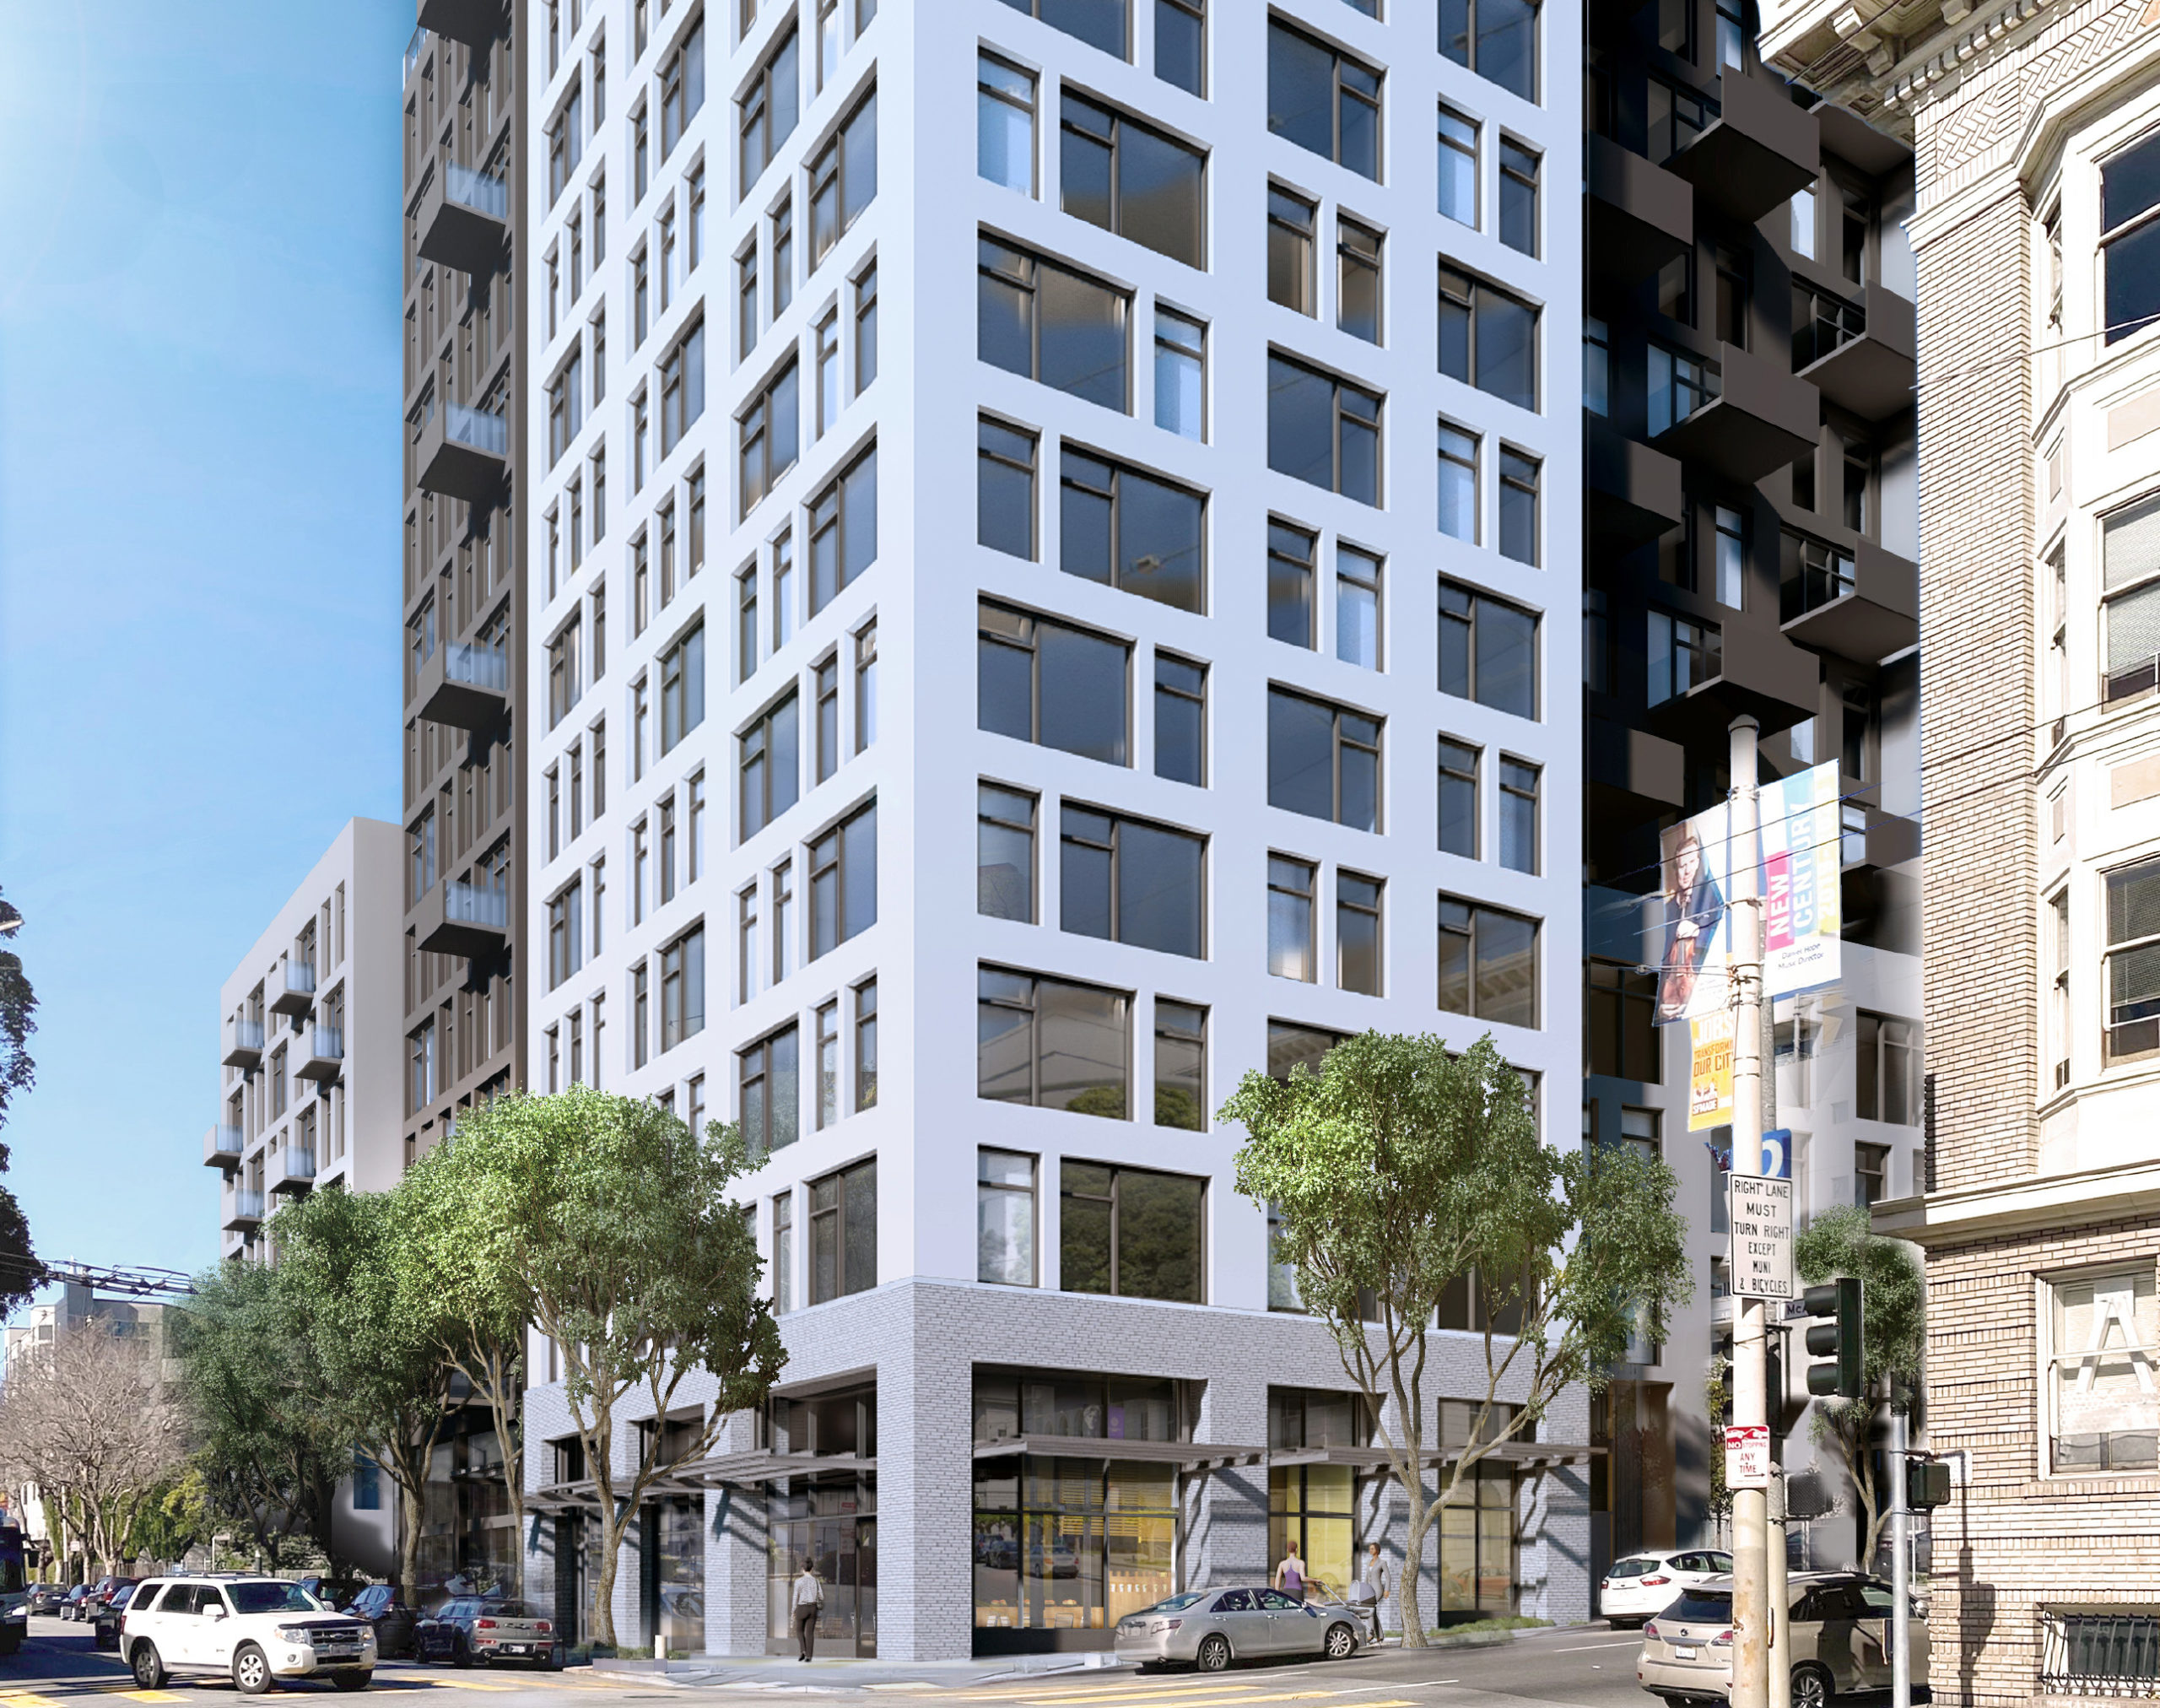 600 McAllister Street at Franklin and McAllister, rendering by David Baker Architects